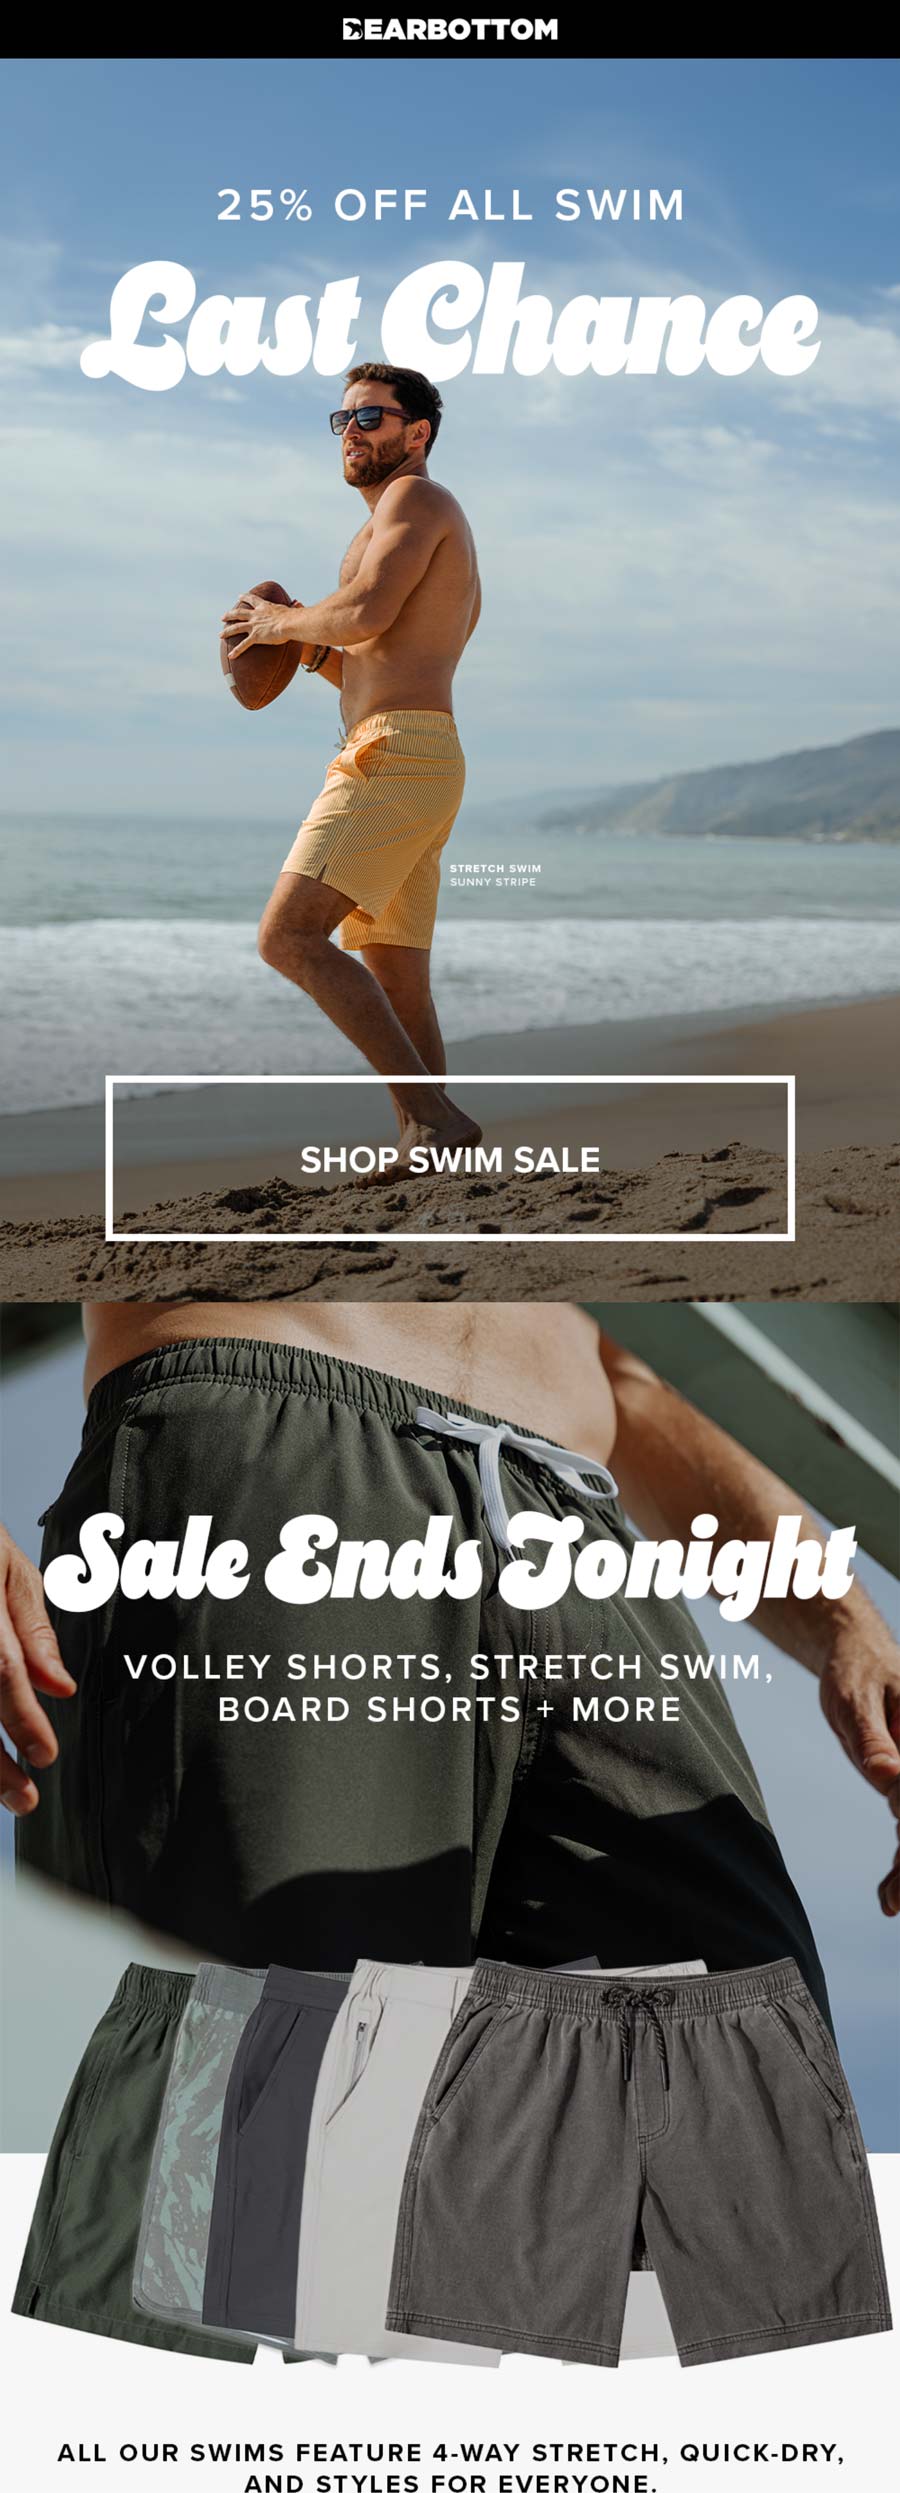 Bearbottom stores Coupon  25% off all swim today at Bearbottom #bearbottom 